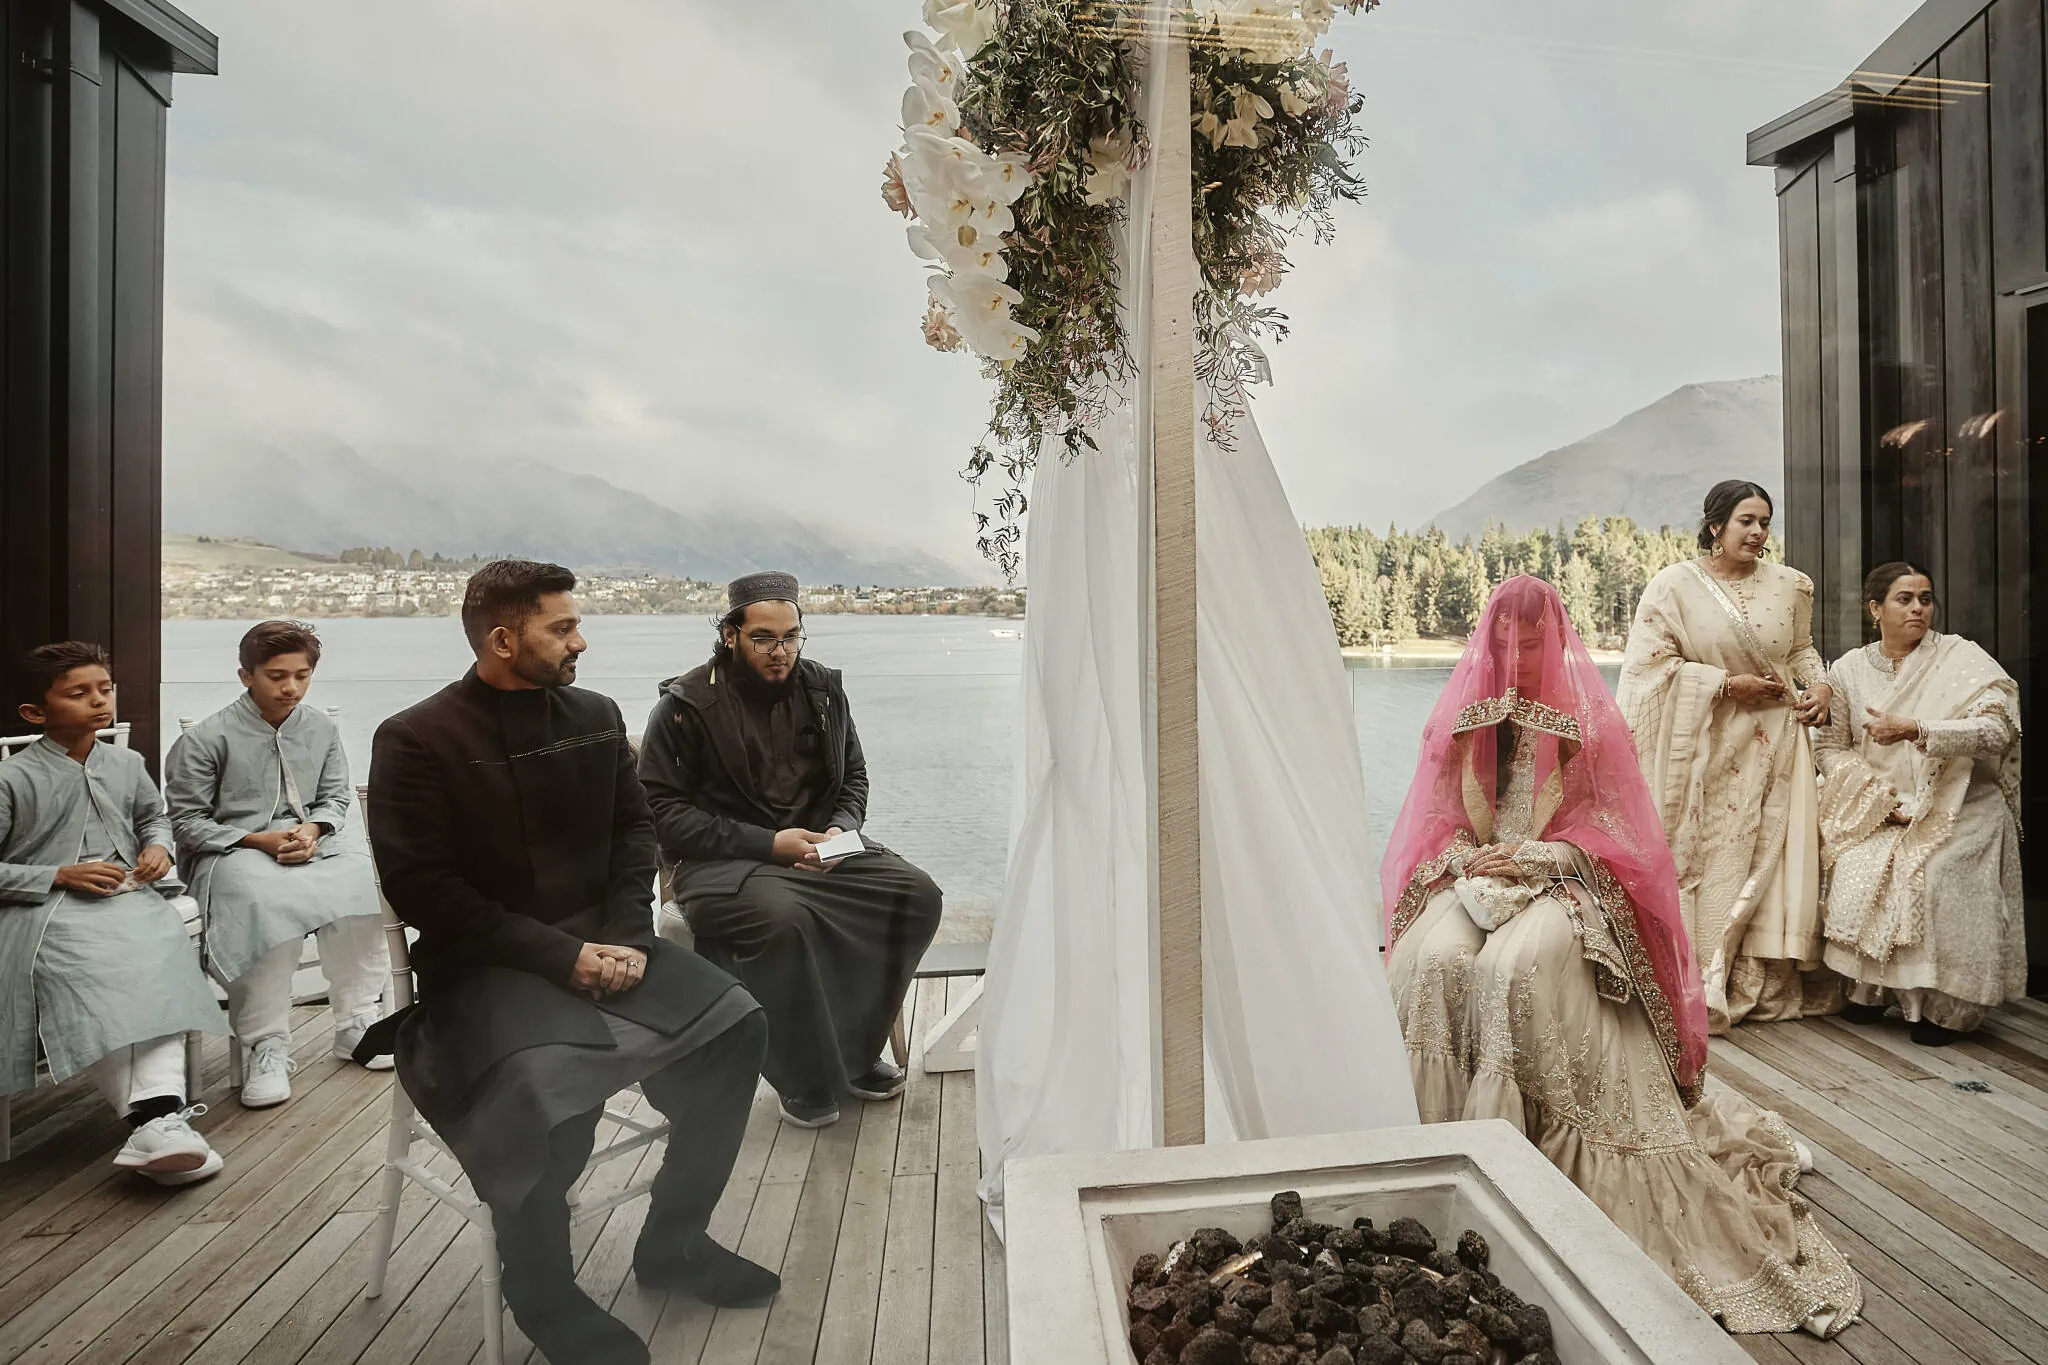 Queenstown New Zealand Elopement Wedding Photographer - Wasim and Yumn's Queenstown Islamic Wedding - A group of people are sitting on a deck in front of a lake.